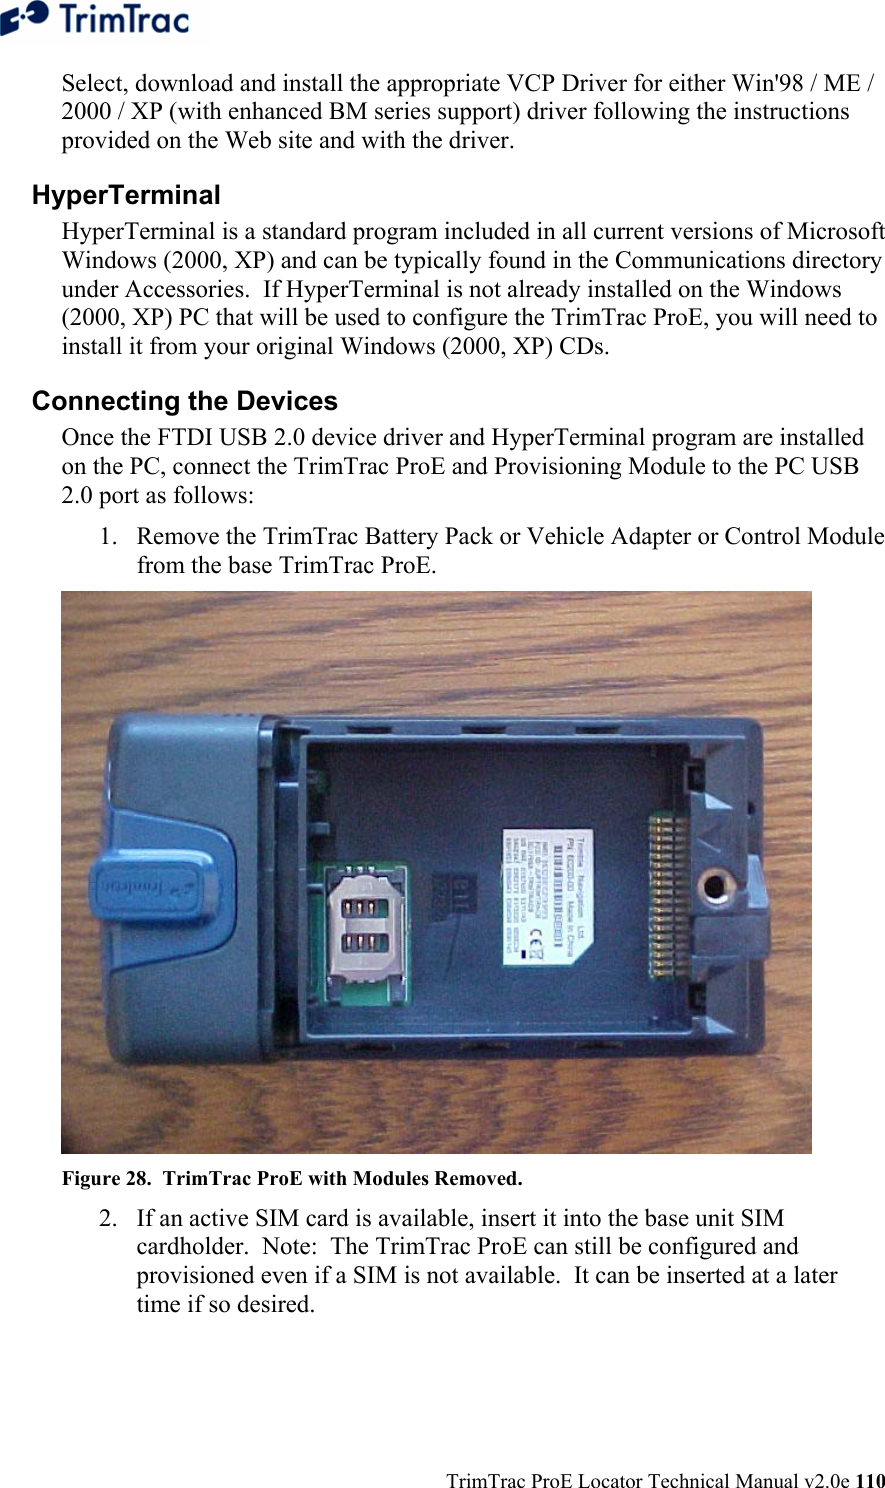  TrimTrac ProE Locator Technical Manual v2.0e 110 Select, download and install the appropriate VCP Driver for either Win&apos;98 / ME / 2000 / XP (with enhanced BM series support) driver following the instructions provided on the Web site and with the driver. HyperTerminal HyperTerminal is a standard program included in all current versions of Microsoft Windows (2000, XP) and can be typically found in the Communications directory under Accessories.  If HyperTerminal is not already installed on the Windows (2000, XP) PC that will be used to configure the TrimTrac ProE, you will need to install it from your original Windows (2000, XP) CDs. Connecting the Devices Once the FTDI USB 2.0 device driver and HyperTerminal program are installed on the PC, connect the TrimTrac ProE and Provisioning Module to the PC USB 2.0 port as follows: 1. Remove the TrimTrac Battery Pack or Vehicle Adapter or Control Module from the base TrimTrac ProE.  Figure 28.  TrimTrac ProE with Modules Removed. 2. If an active SIM card is available, insert it into the base unit SIM cardholder.  Note:  The TrimTrac ProE can still be configured and provisioned even if a SIM is not available.  It can be inserted at a later time if so desired. 